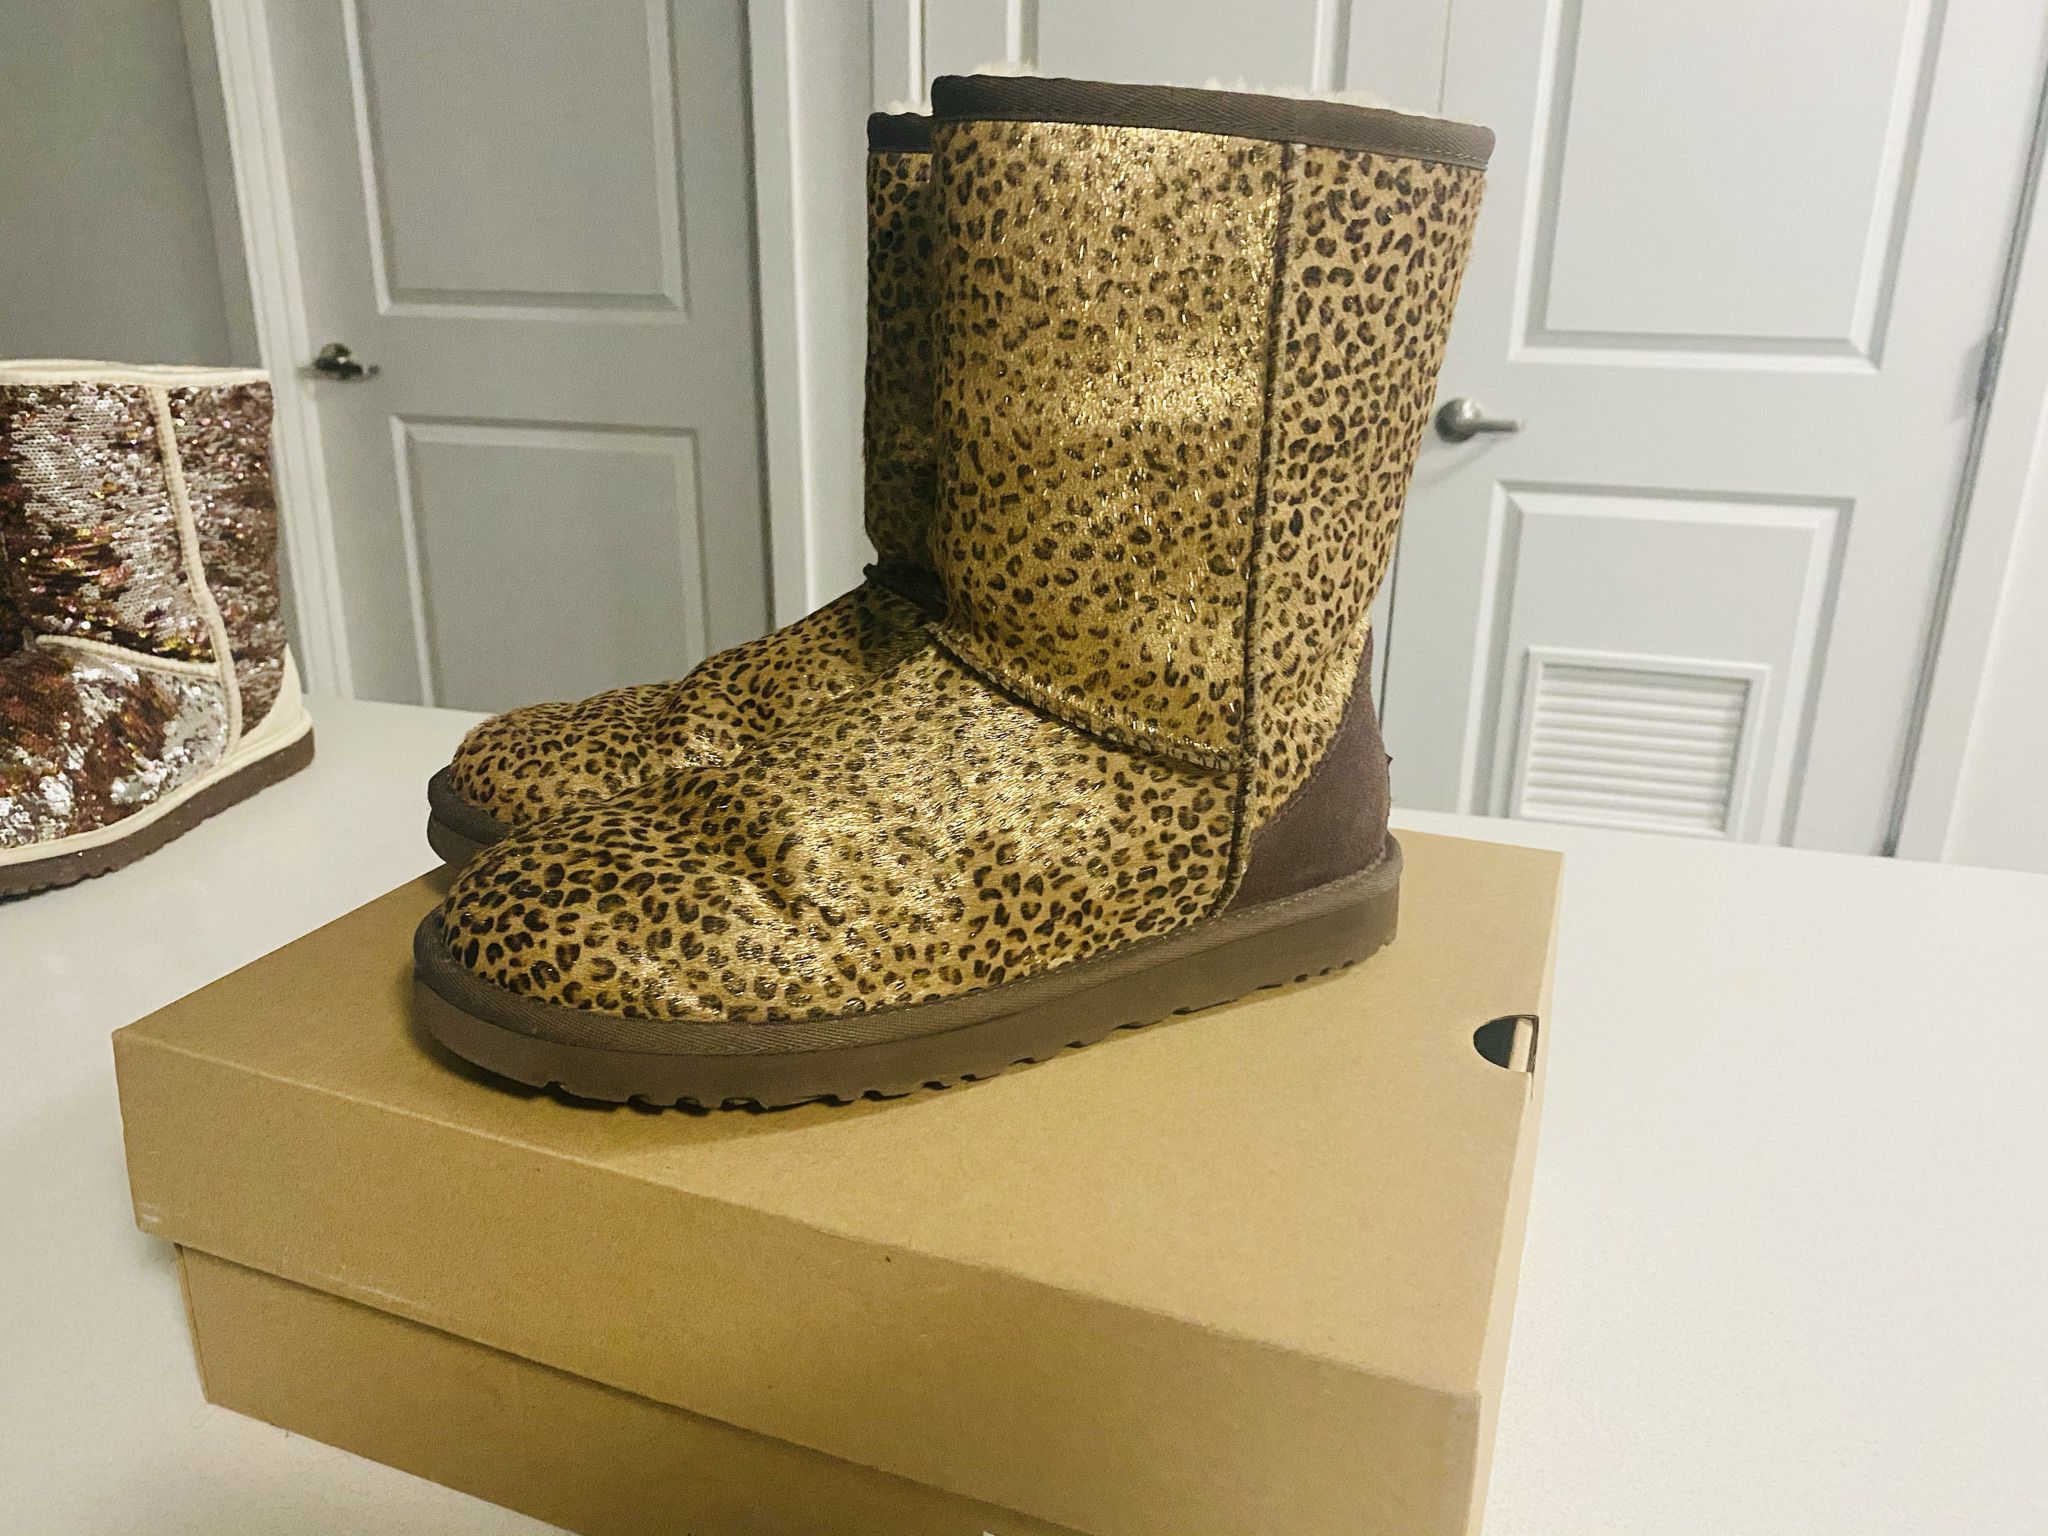 LIMITED EDITION GOLD LEOPARD UGG BOOTS SIZE 8 Women 